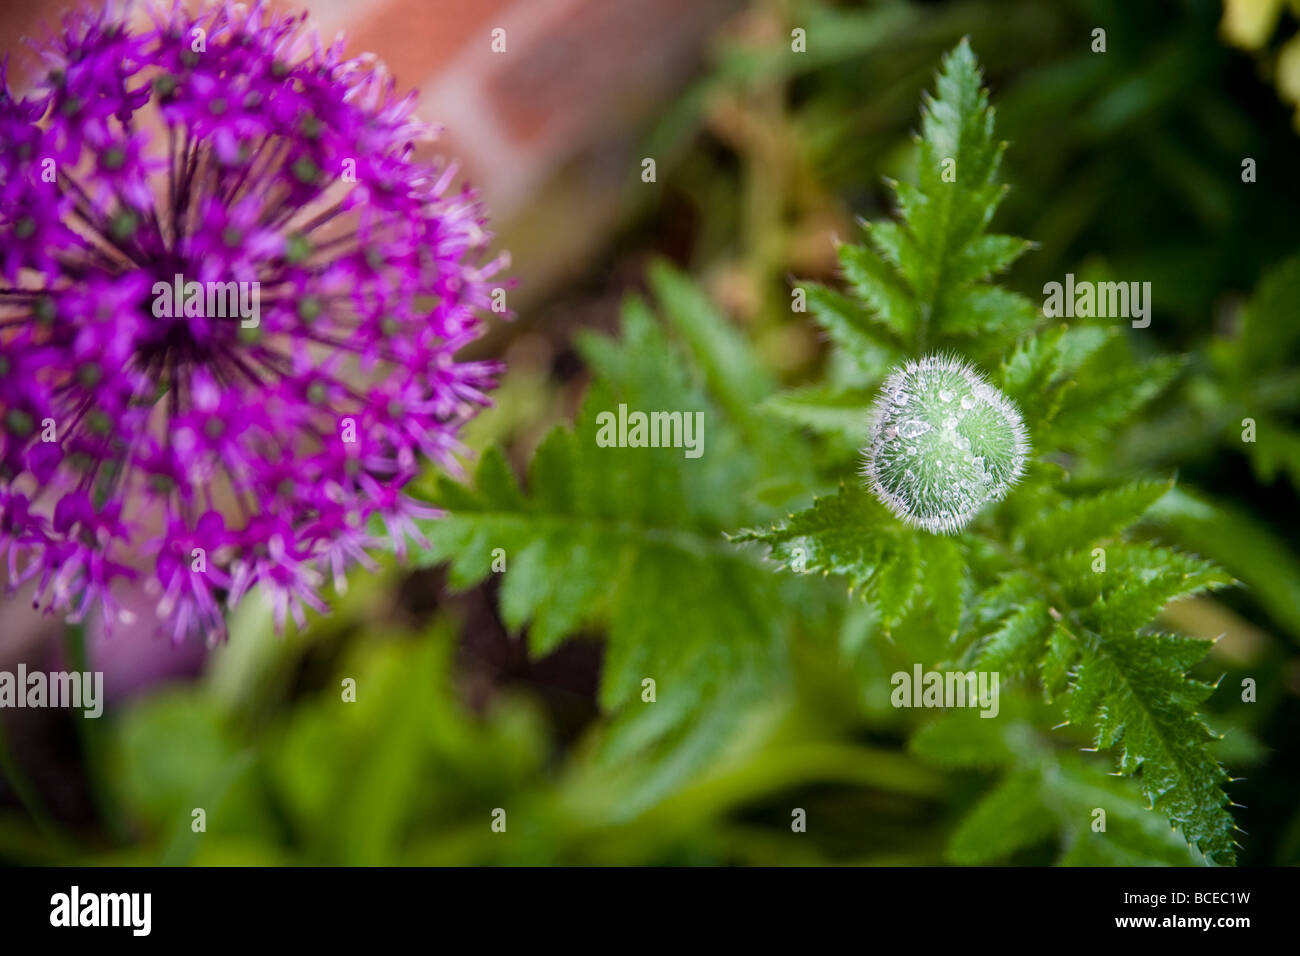 Water droplets on an unopened Poppy Flower Head and A Purple Allium Giganteum Flower. Stock Photo